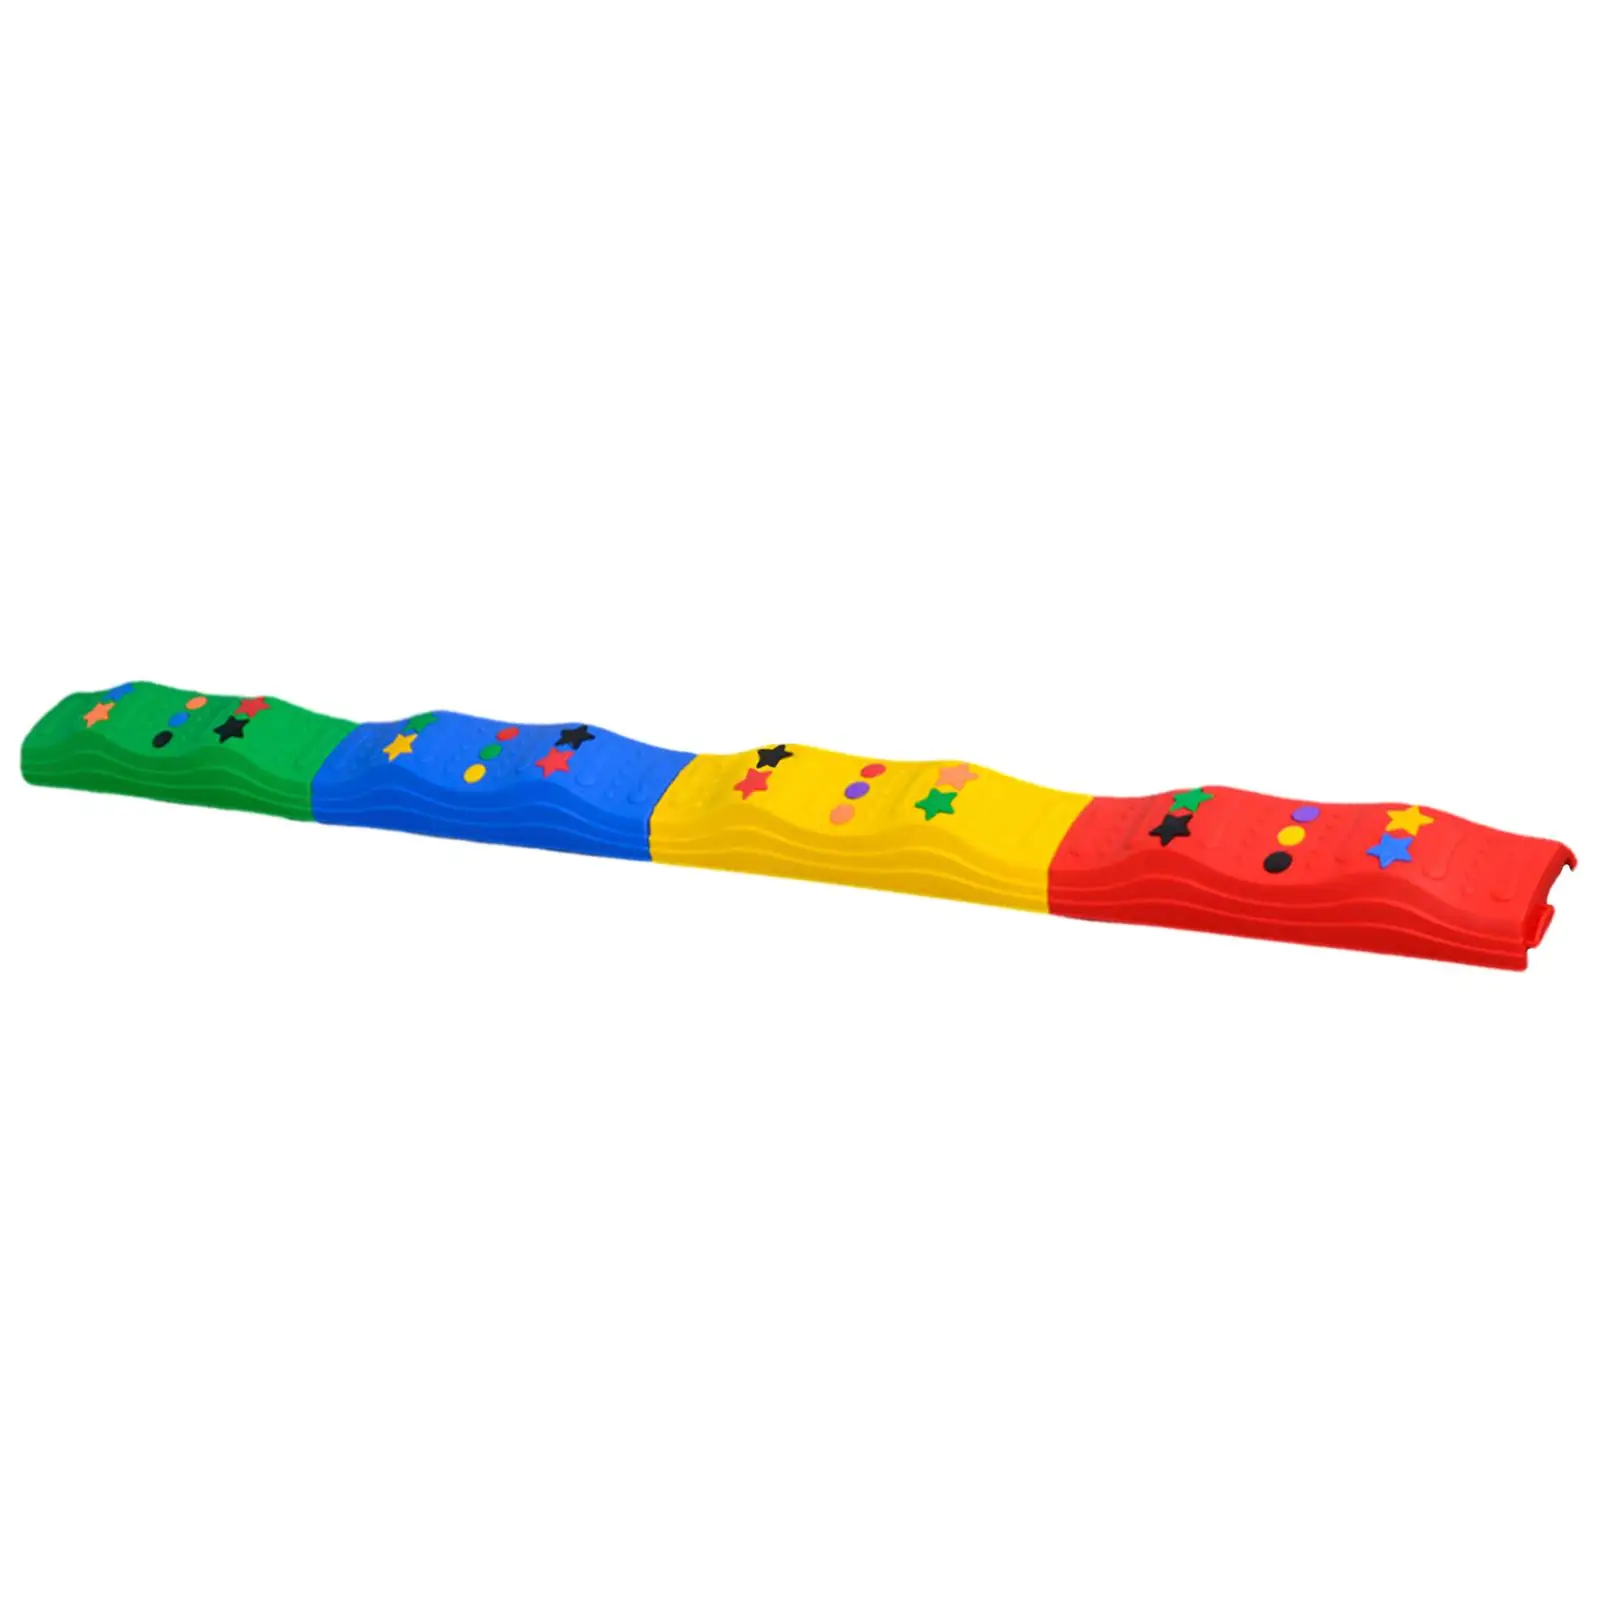 Colored Balance Beams Toddler Balance Blocks Gym Toys Promote Agility Strength Non Slip Textured Preschool Valentines Day Gifts